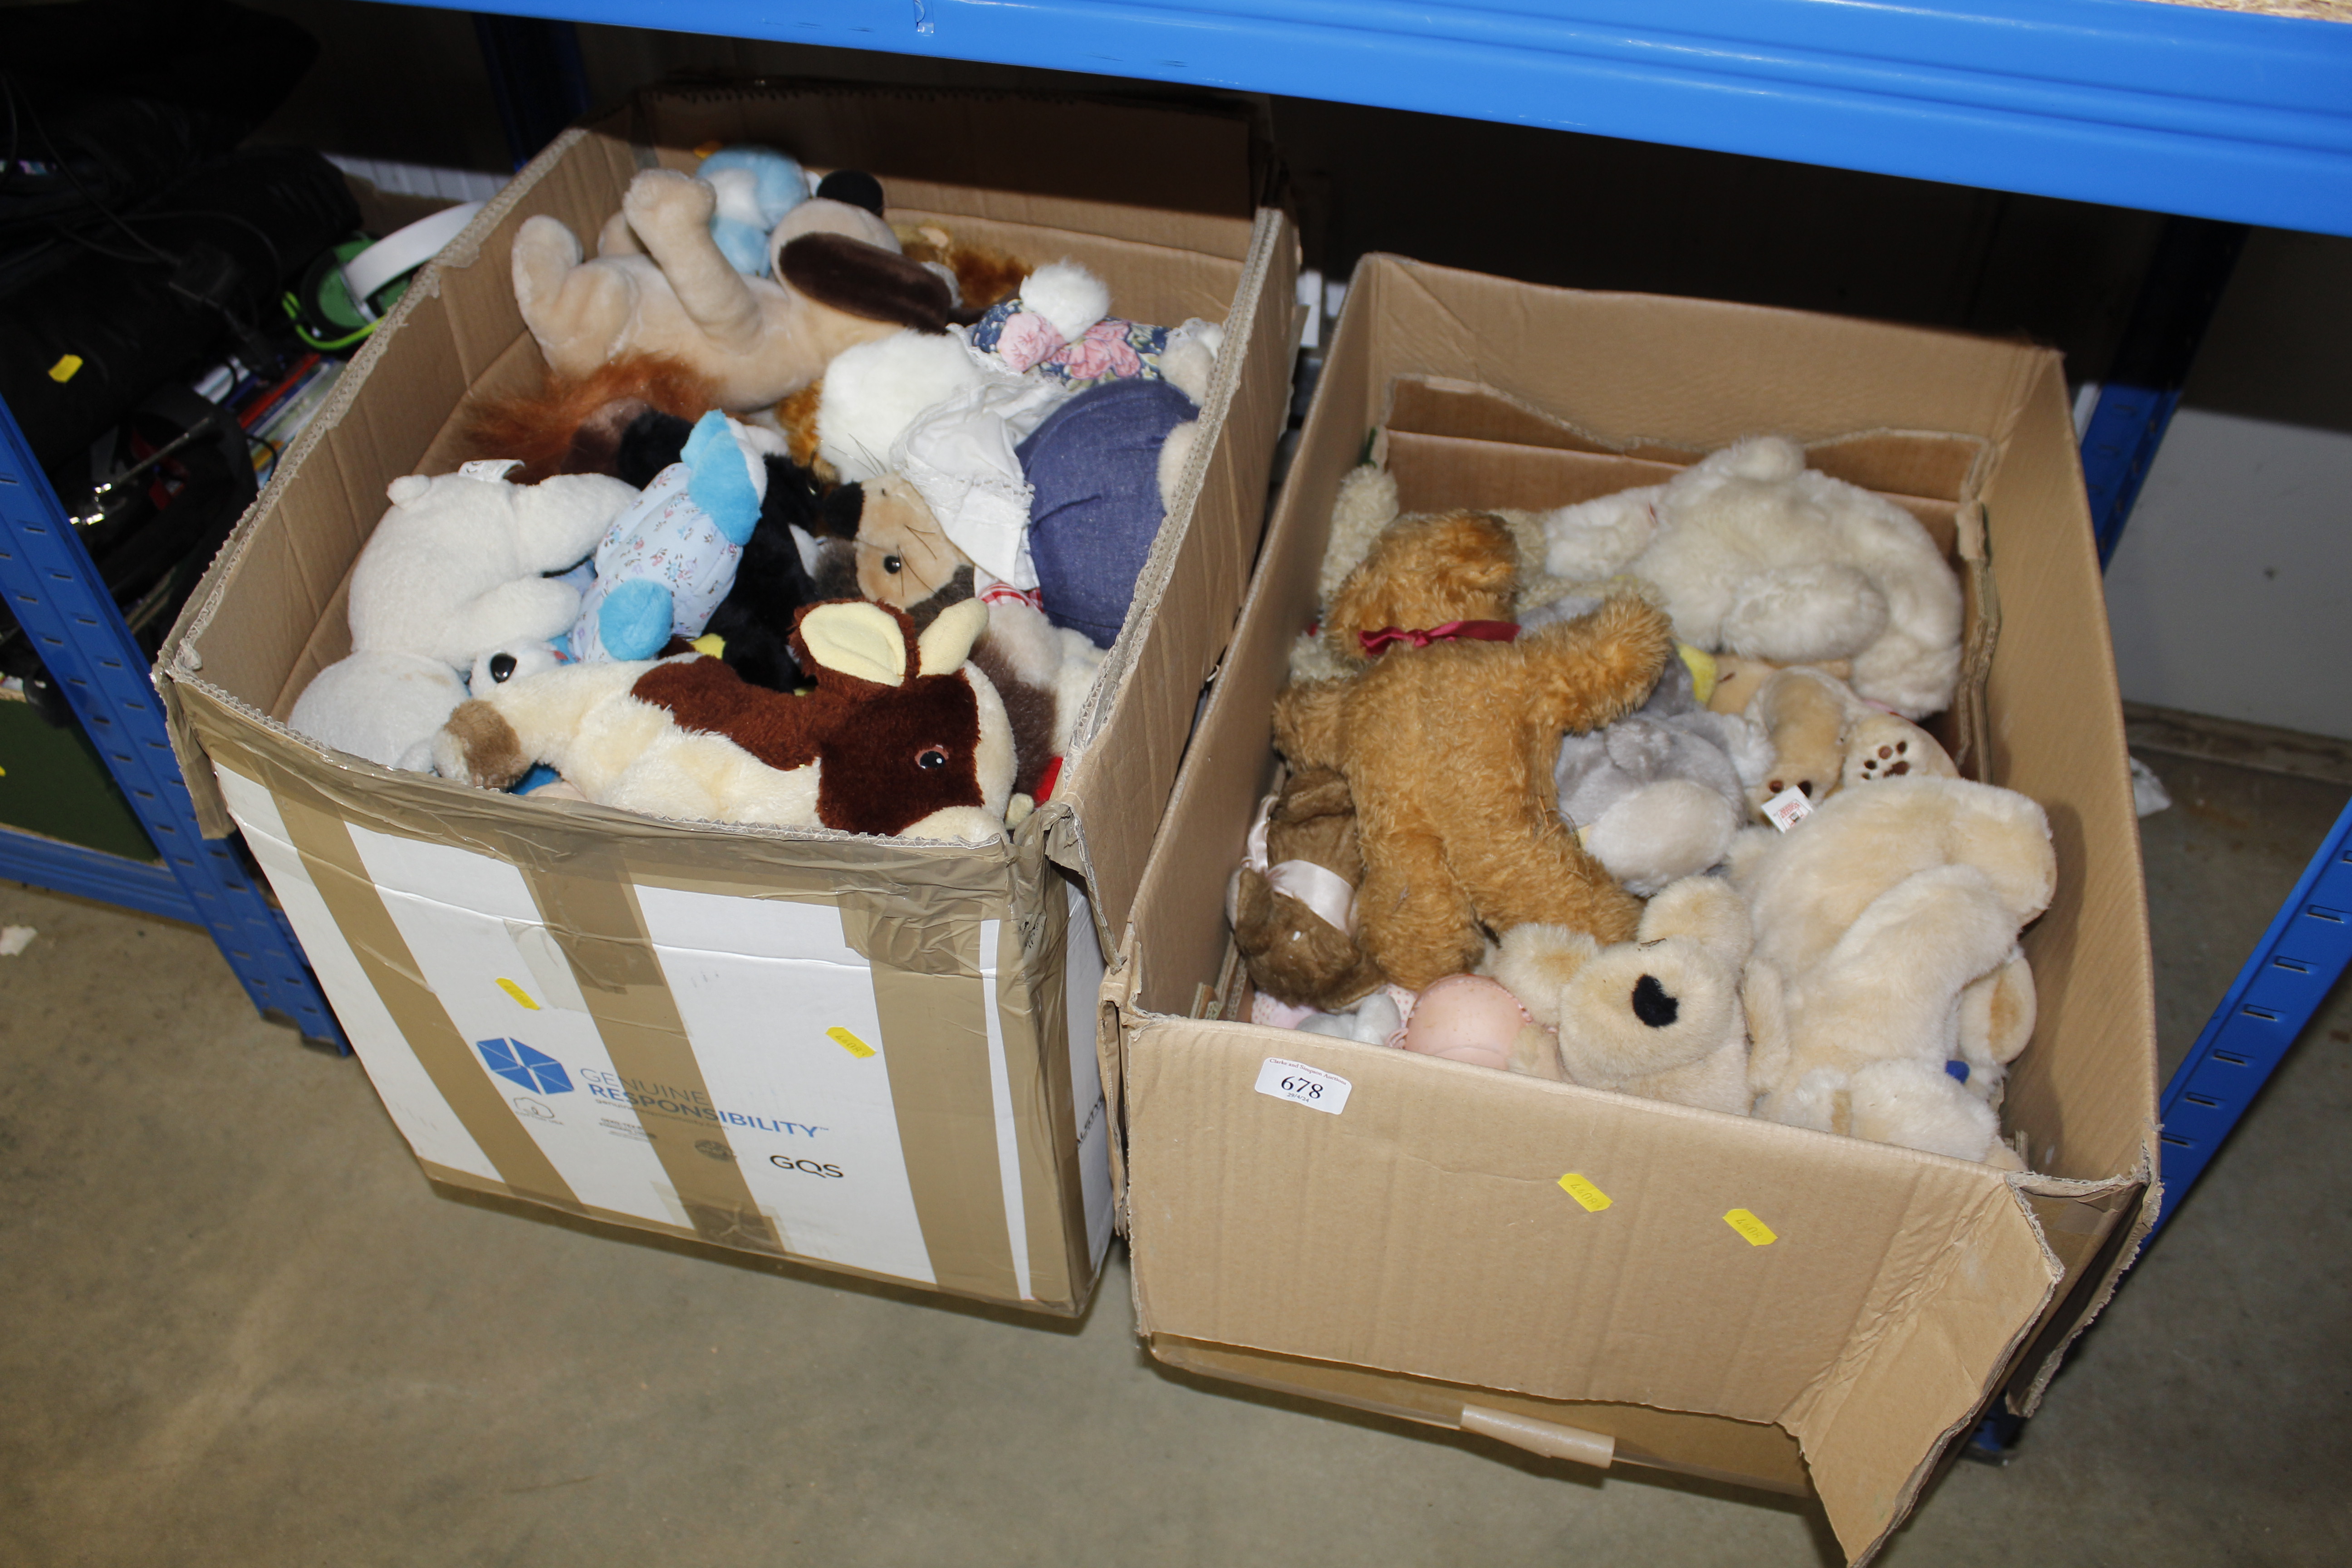 Two boxes containing various stuffed toys